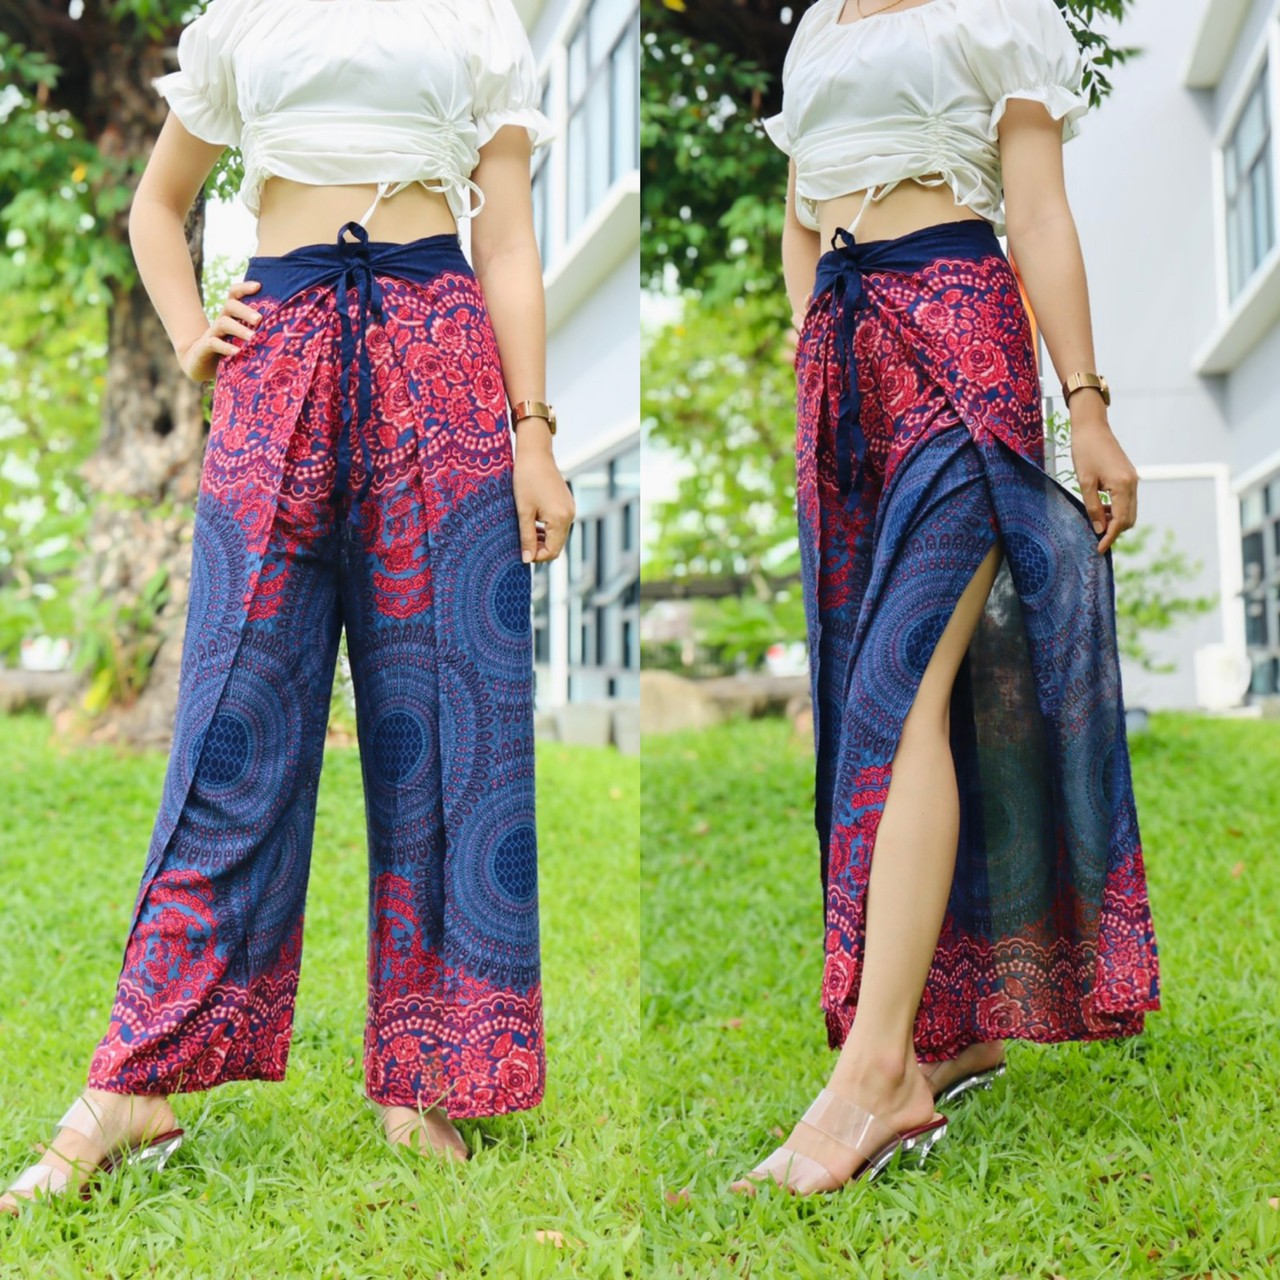 Stylish boho beach wrap pants with intricate red and blue pattern and white crop top on outdoor model.